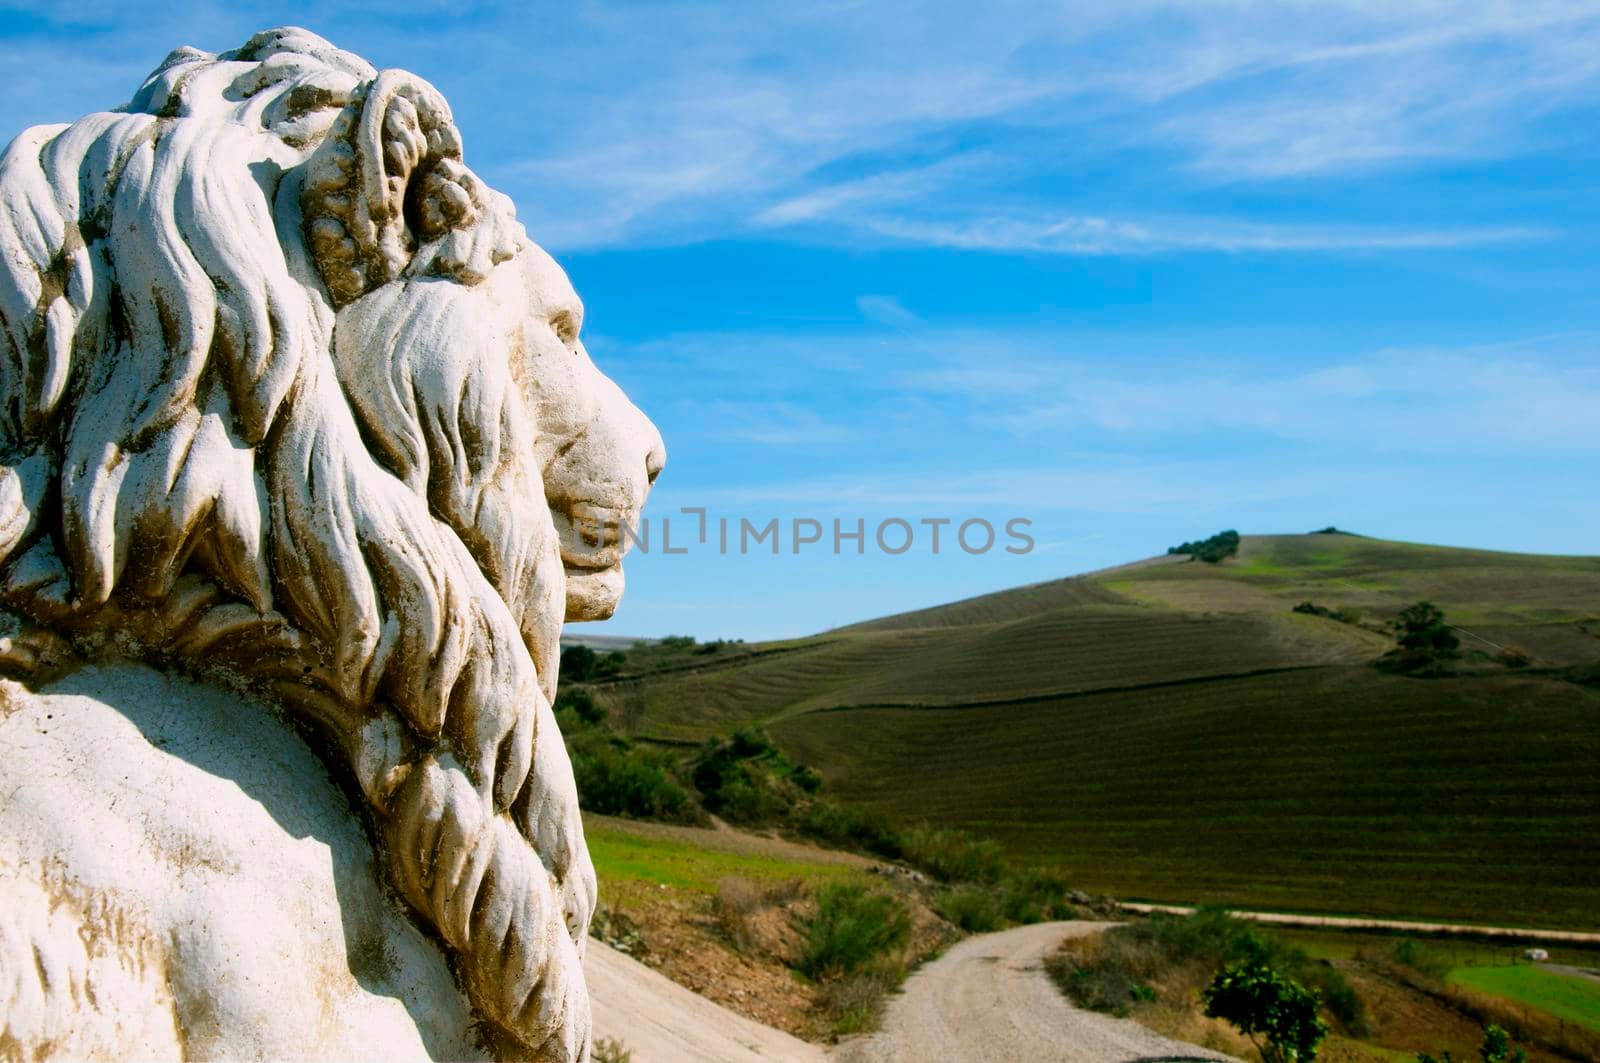 Head of lion sculpture looking at the road in the field background by Bezdnatm